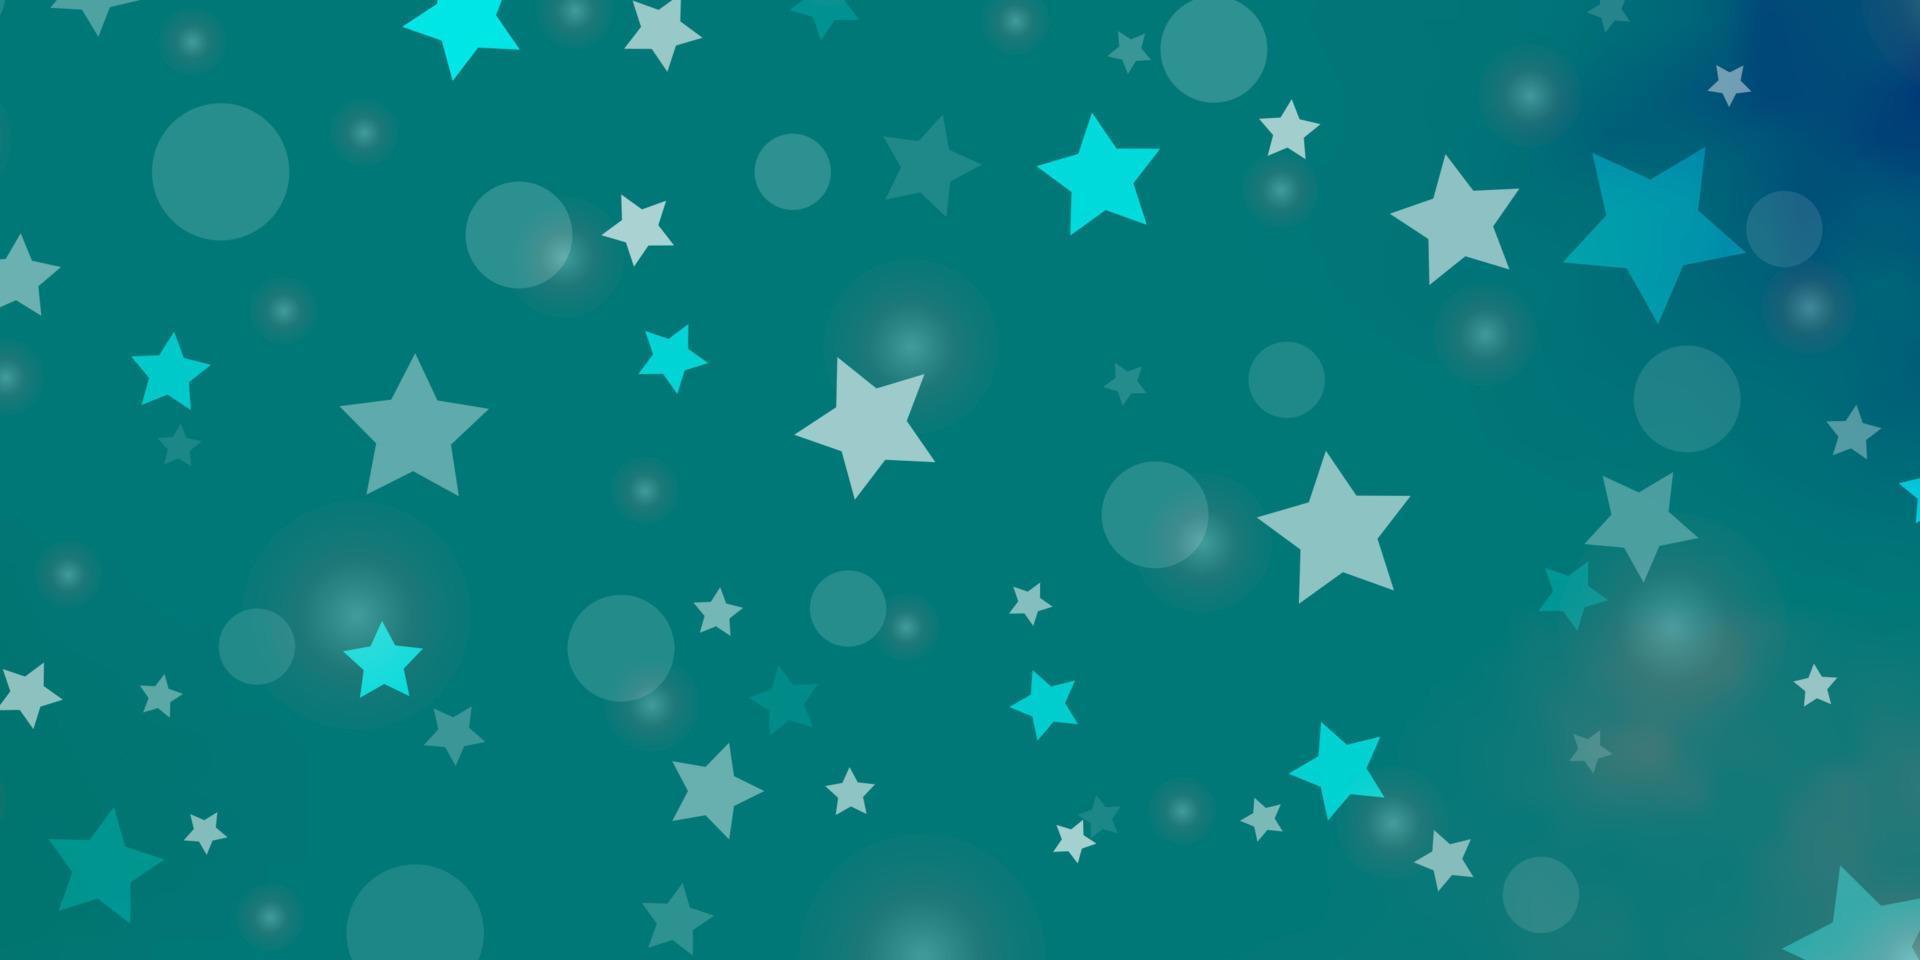 Light Blue, Green vector layout with circles, stars.